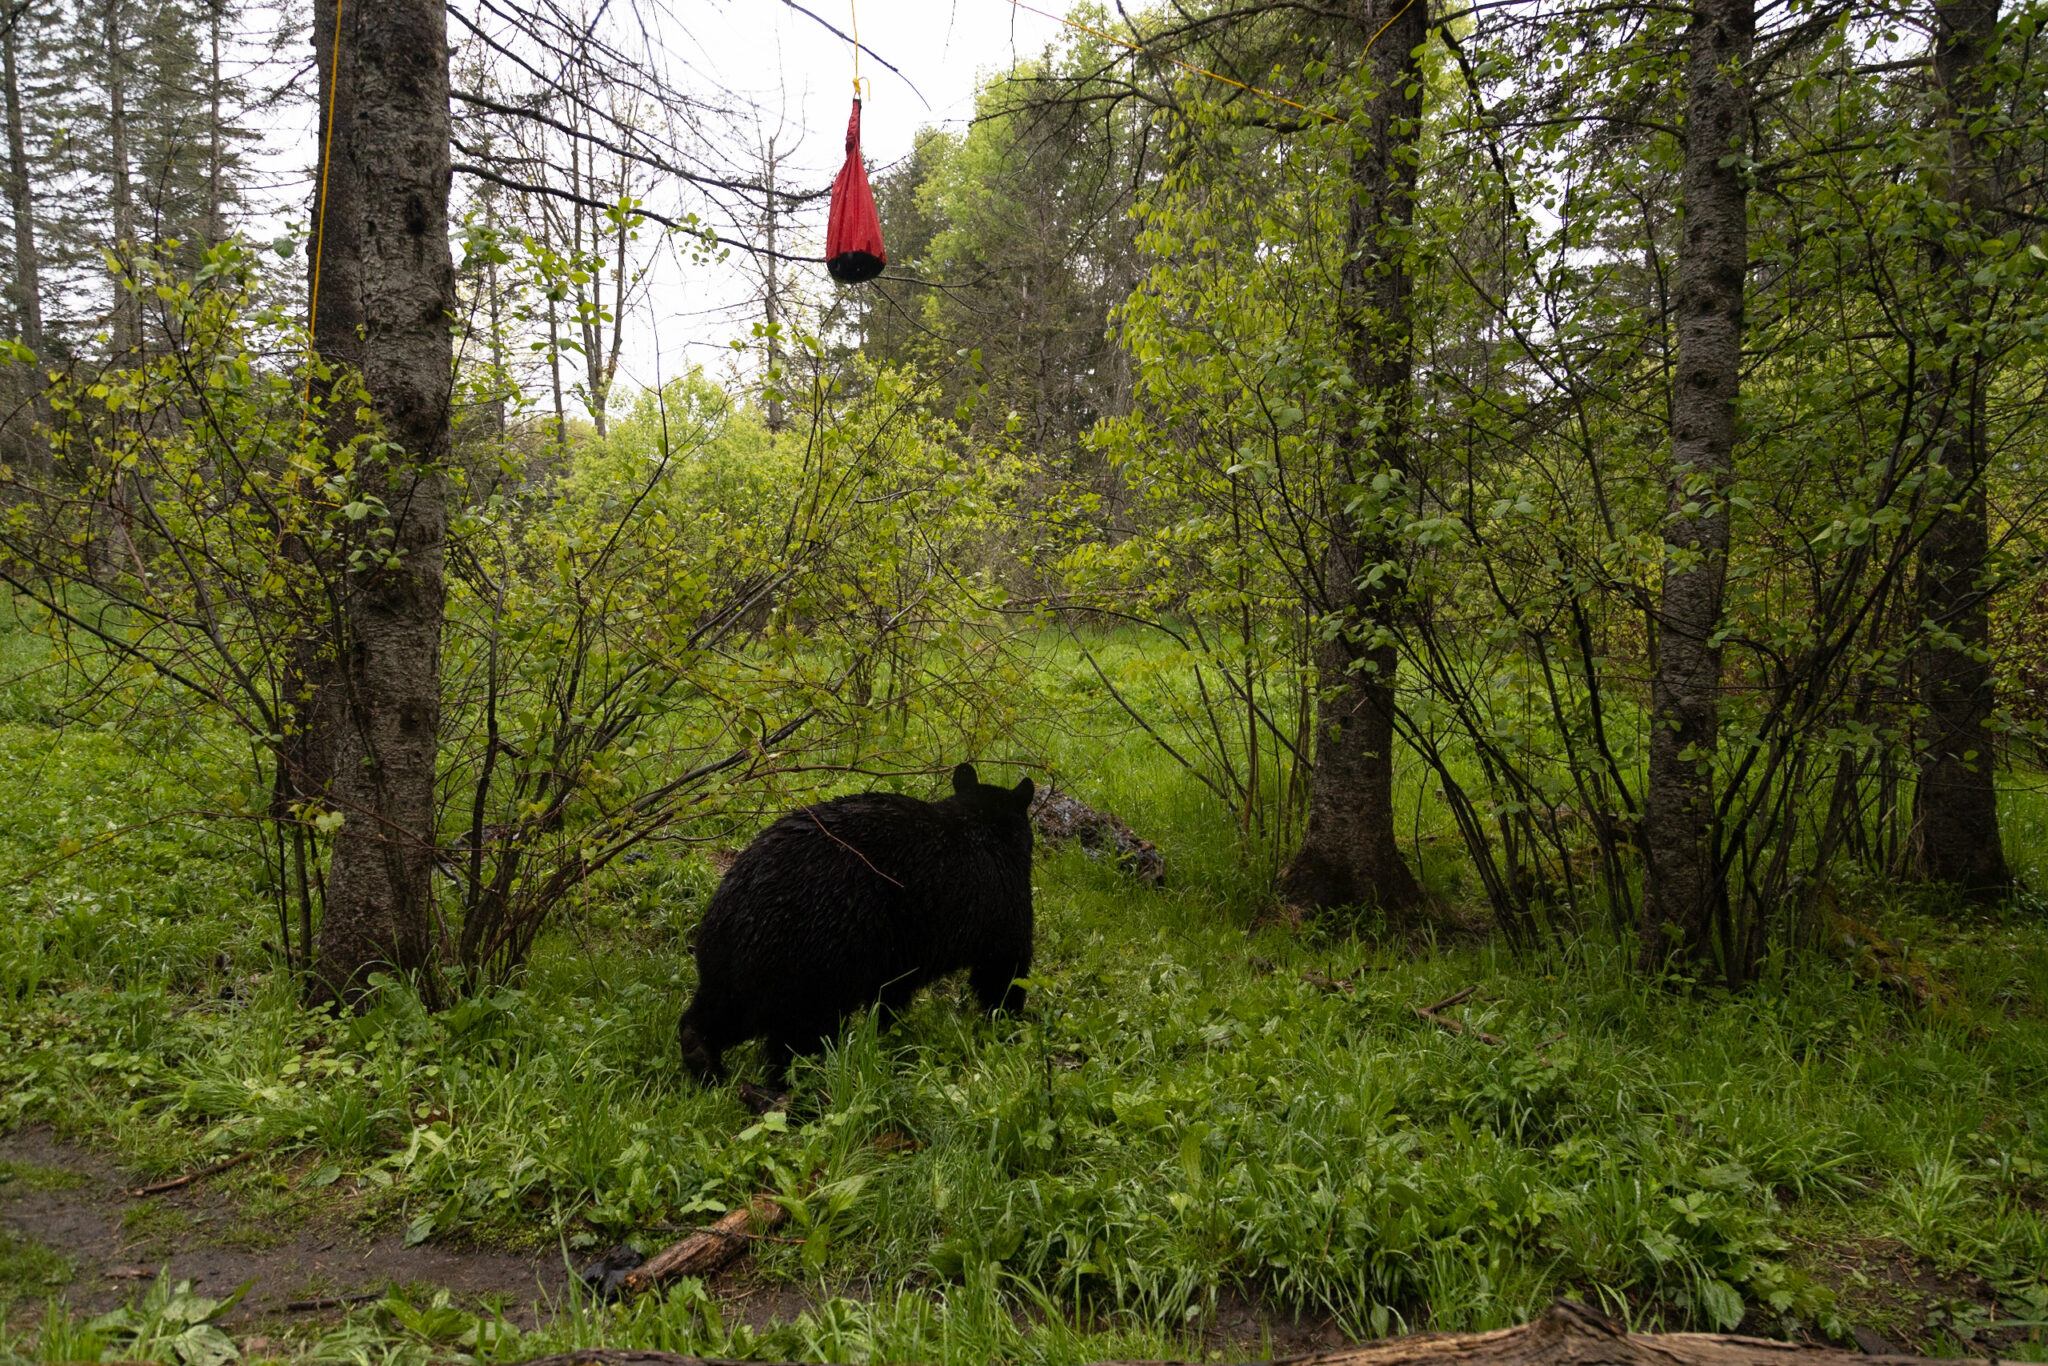 A bear looks at a food bag hanging from a tree.